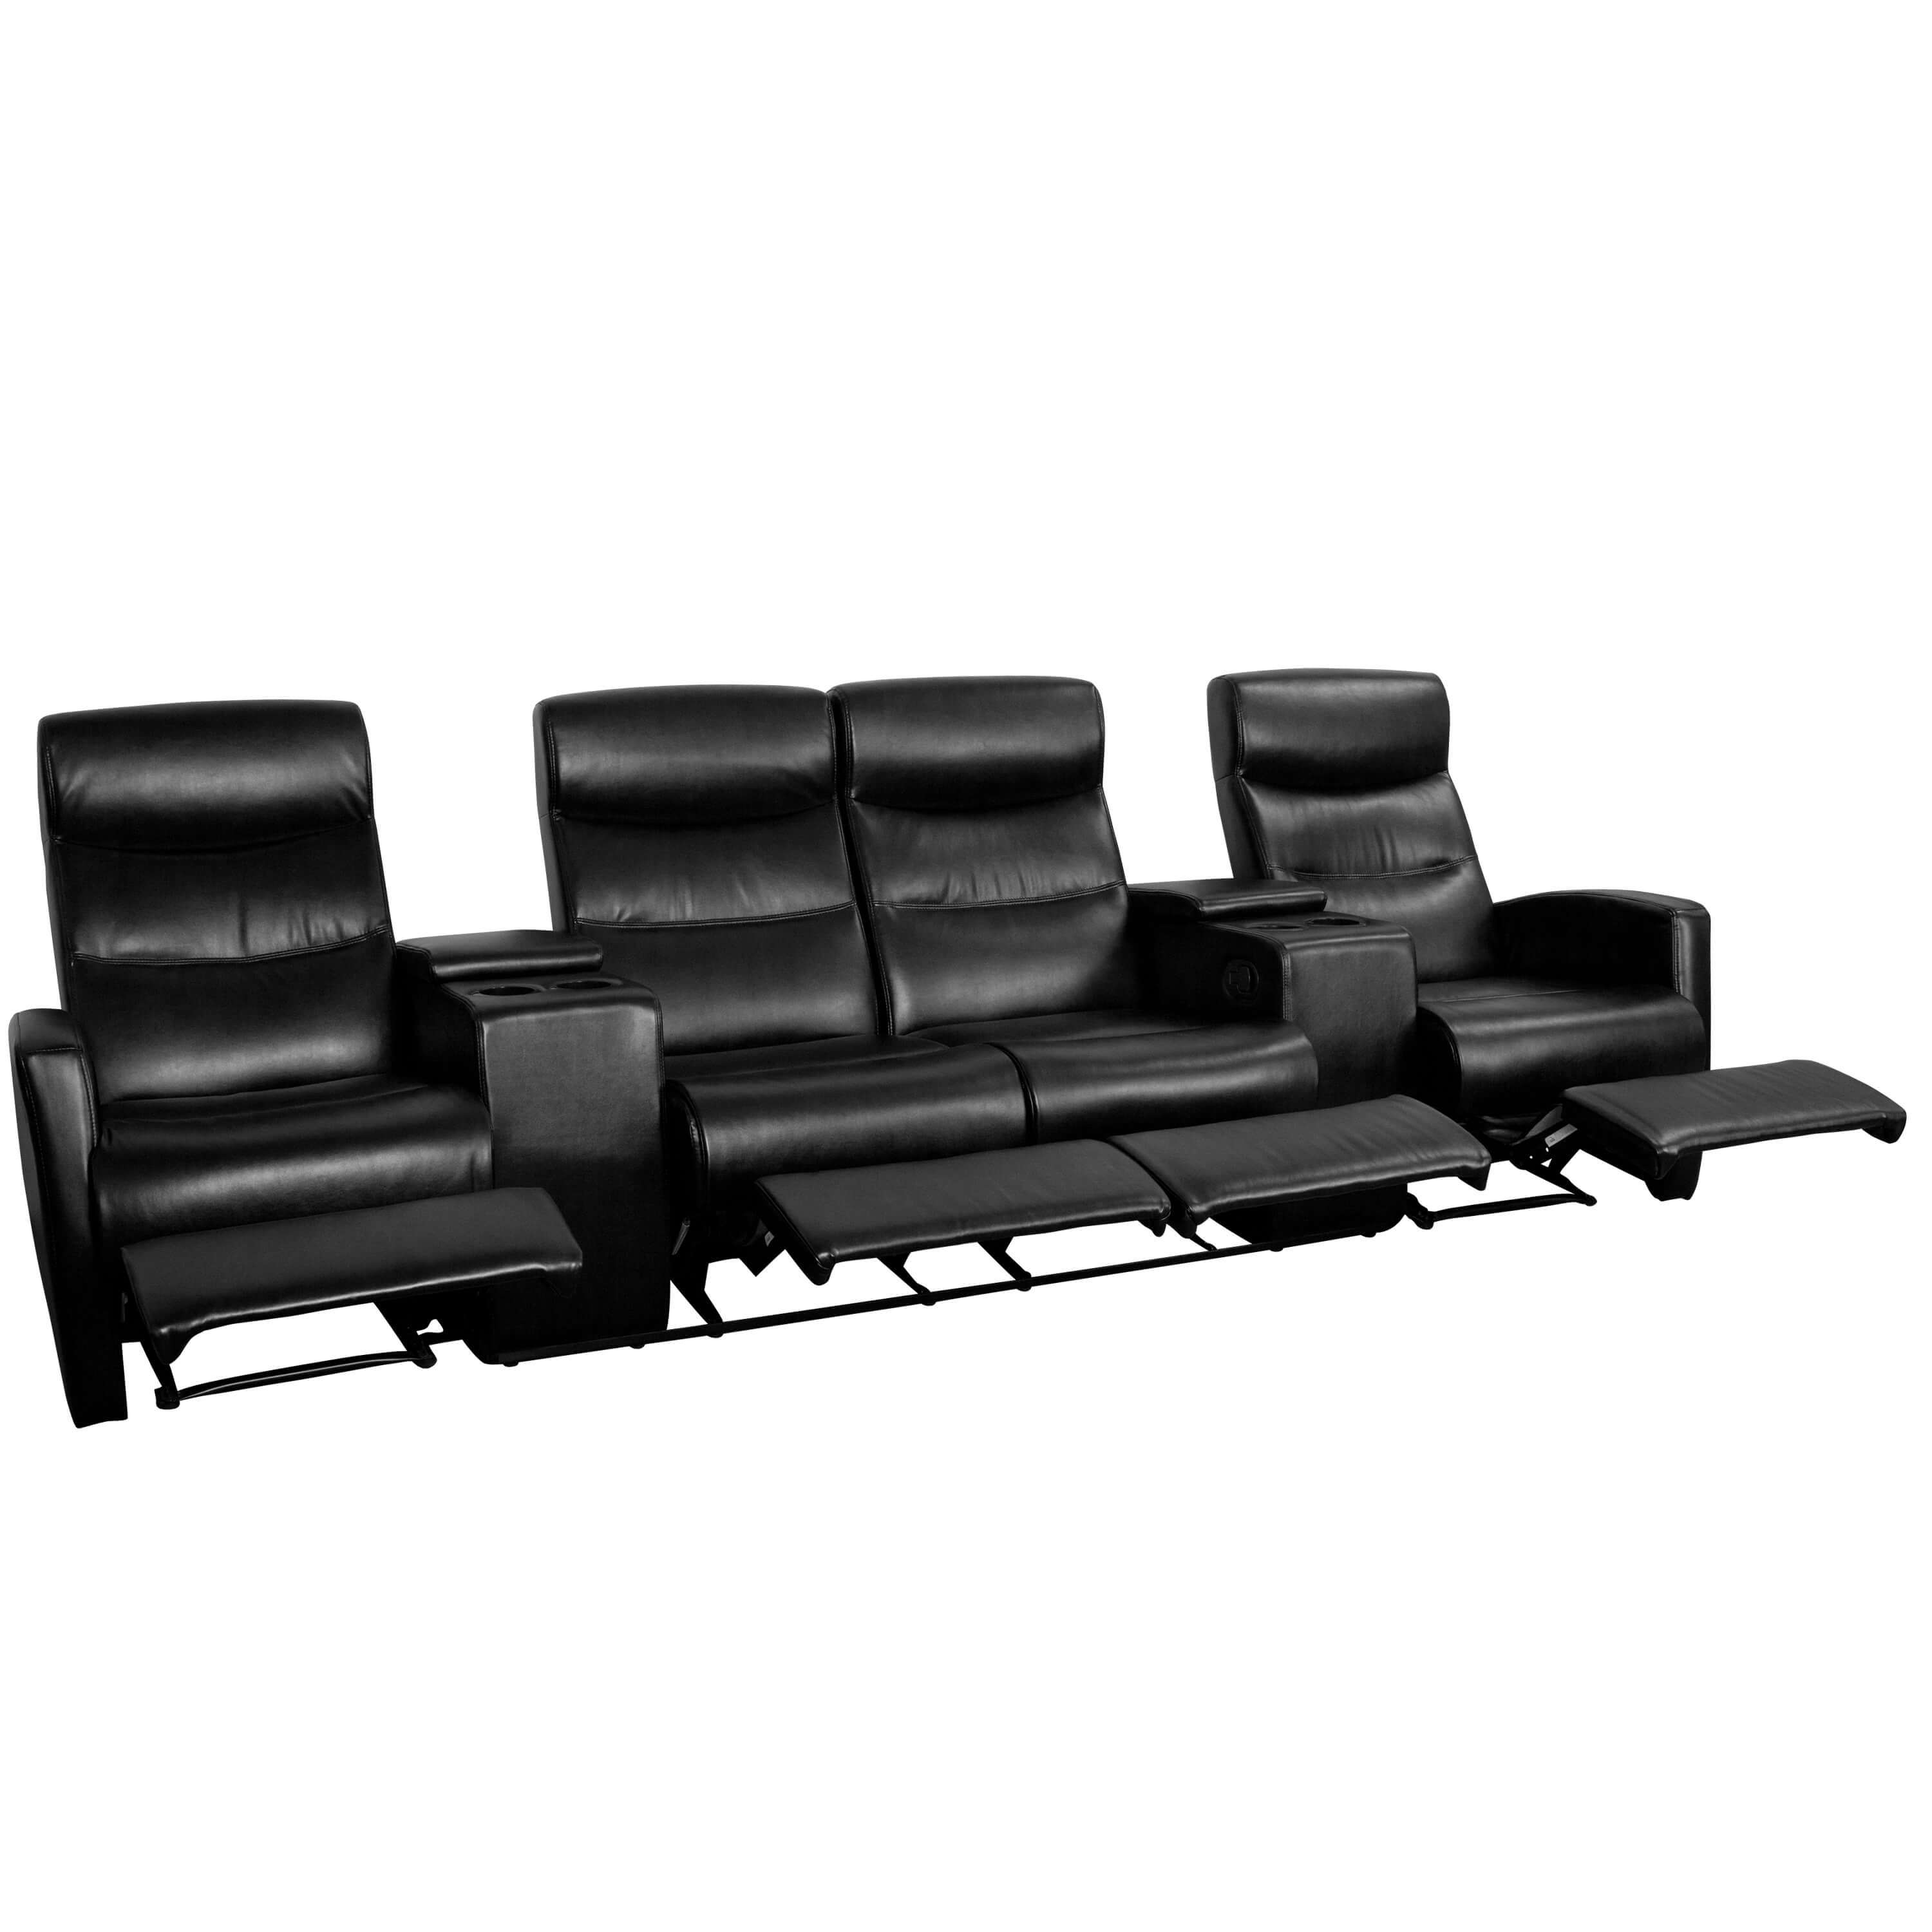 4-seater-recliner-sofa-reclined-view.jpg